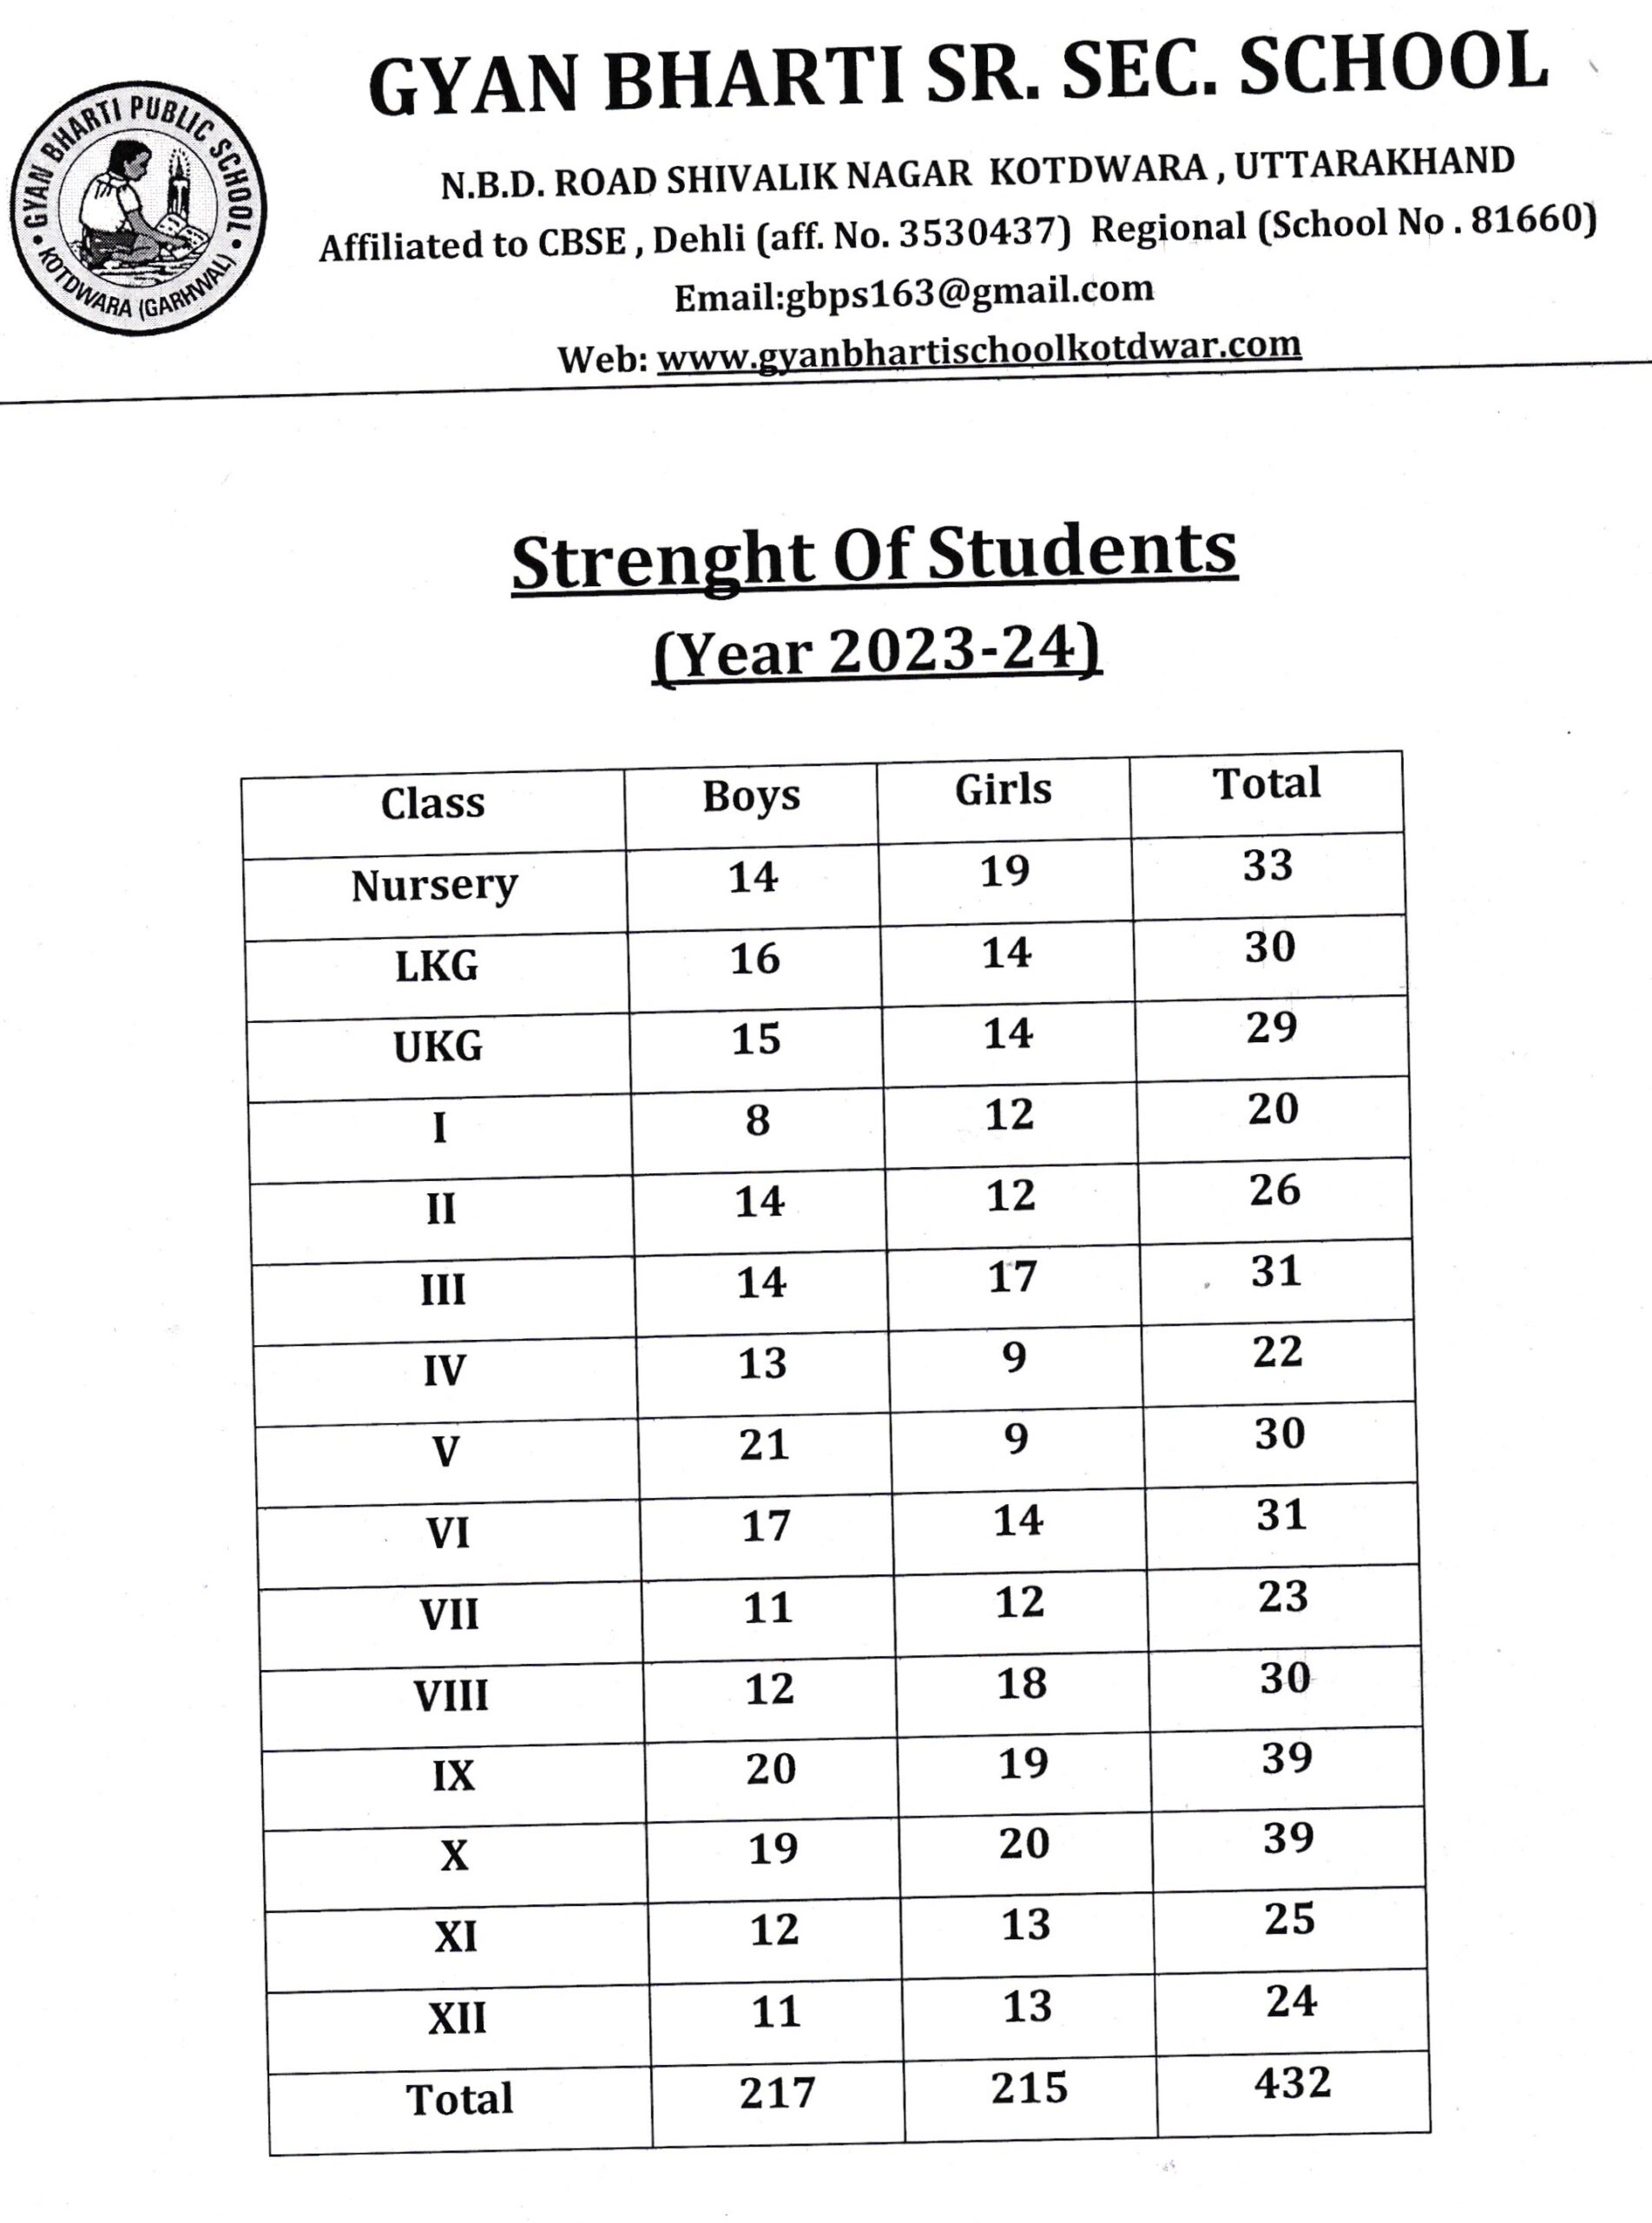 Strength of Students (2023-24)